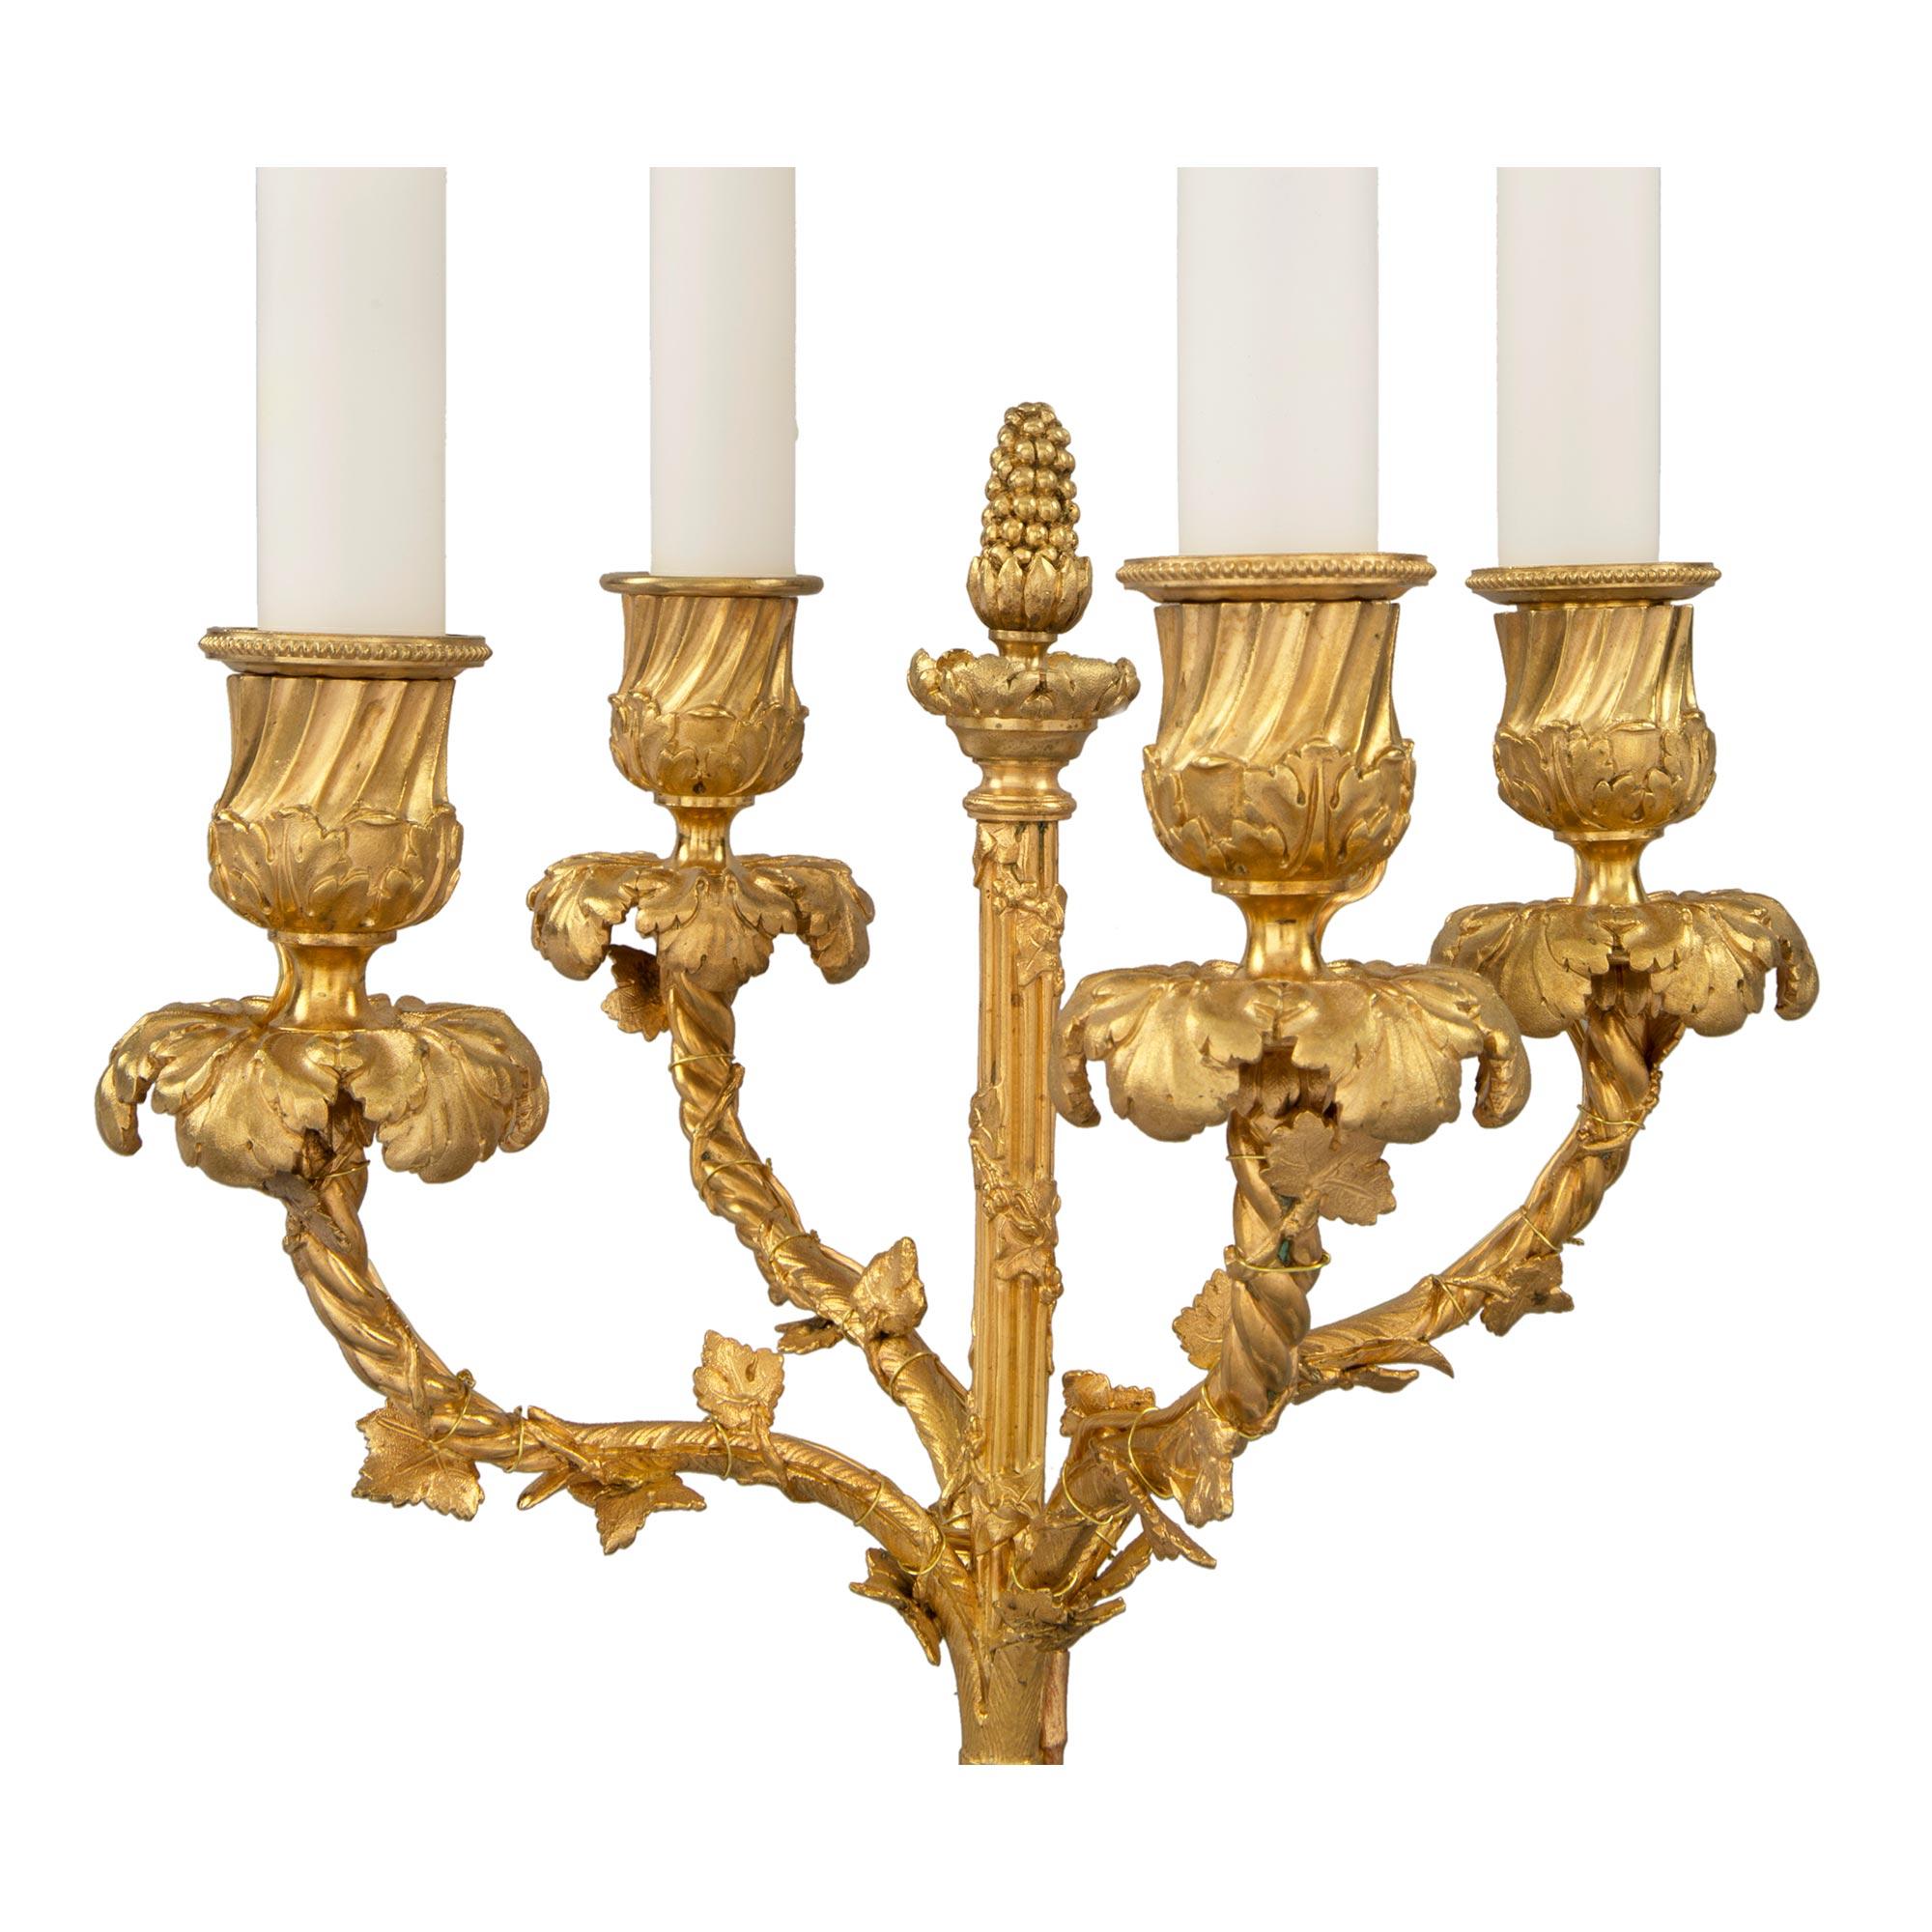 Pair of French 19th Century Louis XVI Style Candelabras Lamps In Good Condition For Sale In West Palm Beach, FL